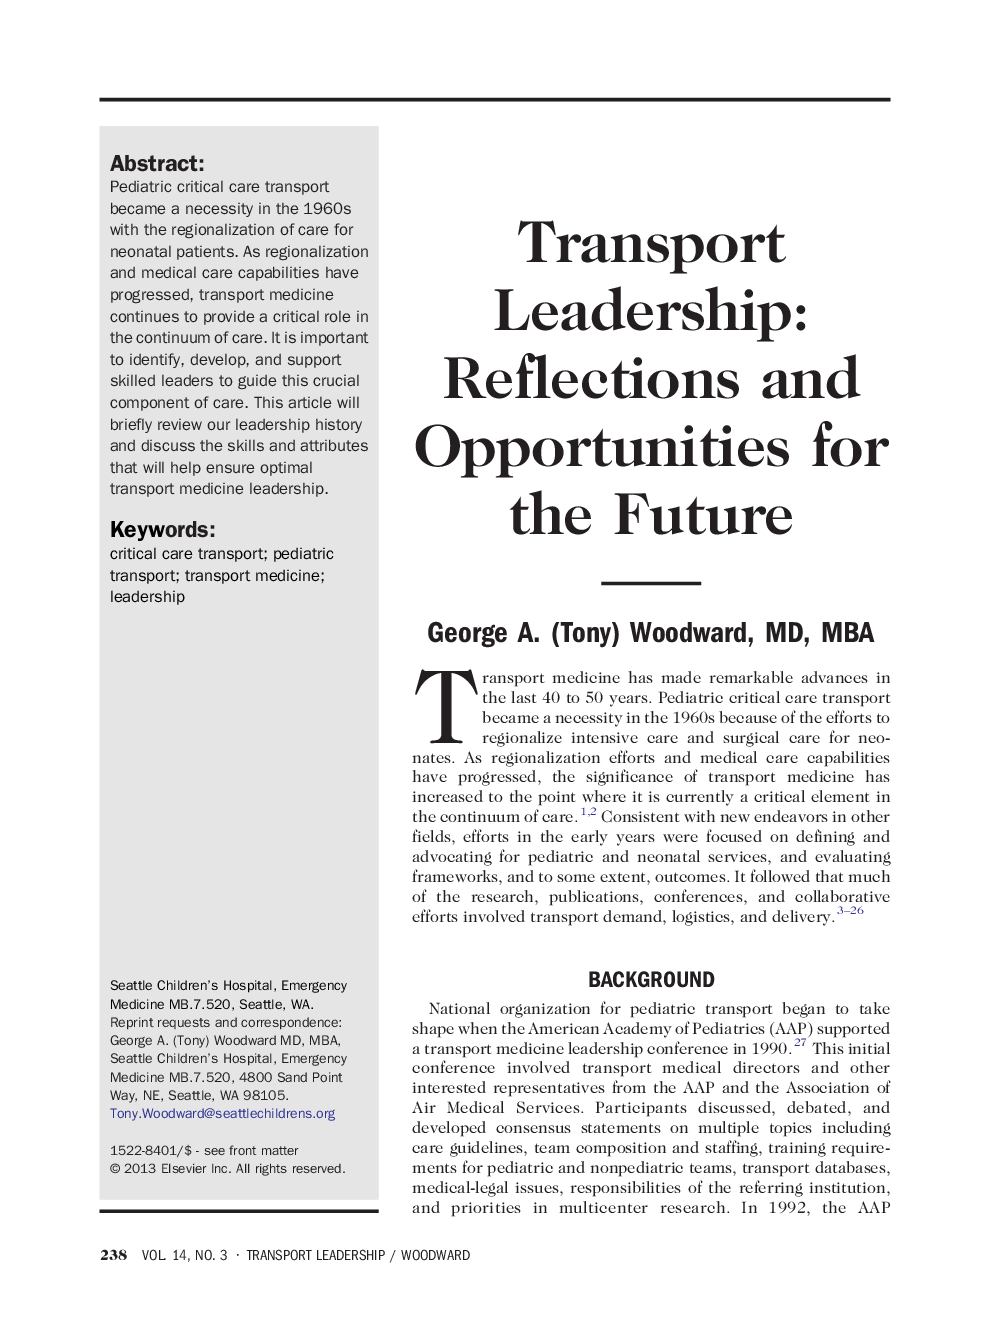 Transport Leadership: Reflections and Opportunities for the Future